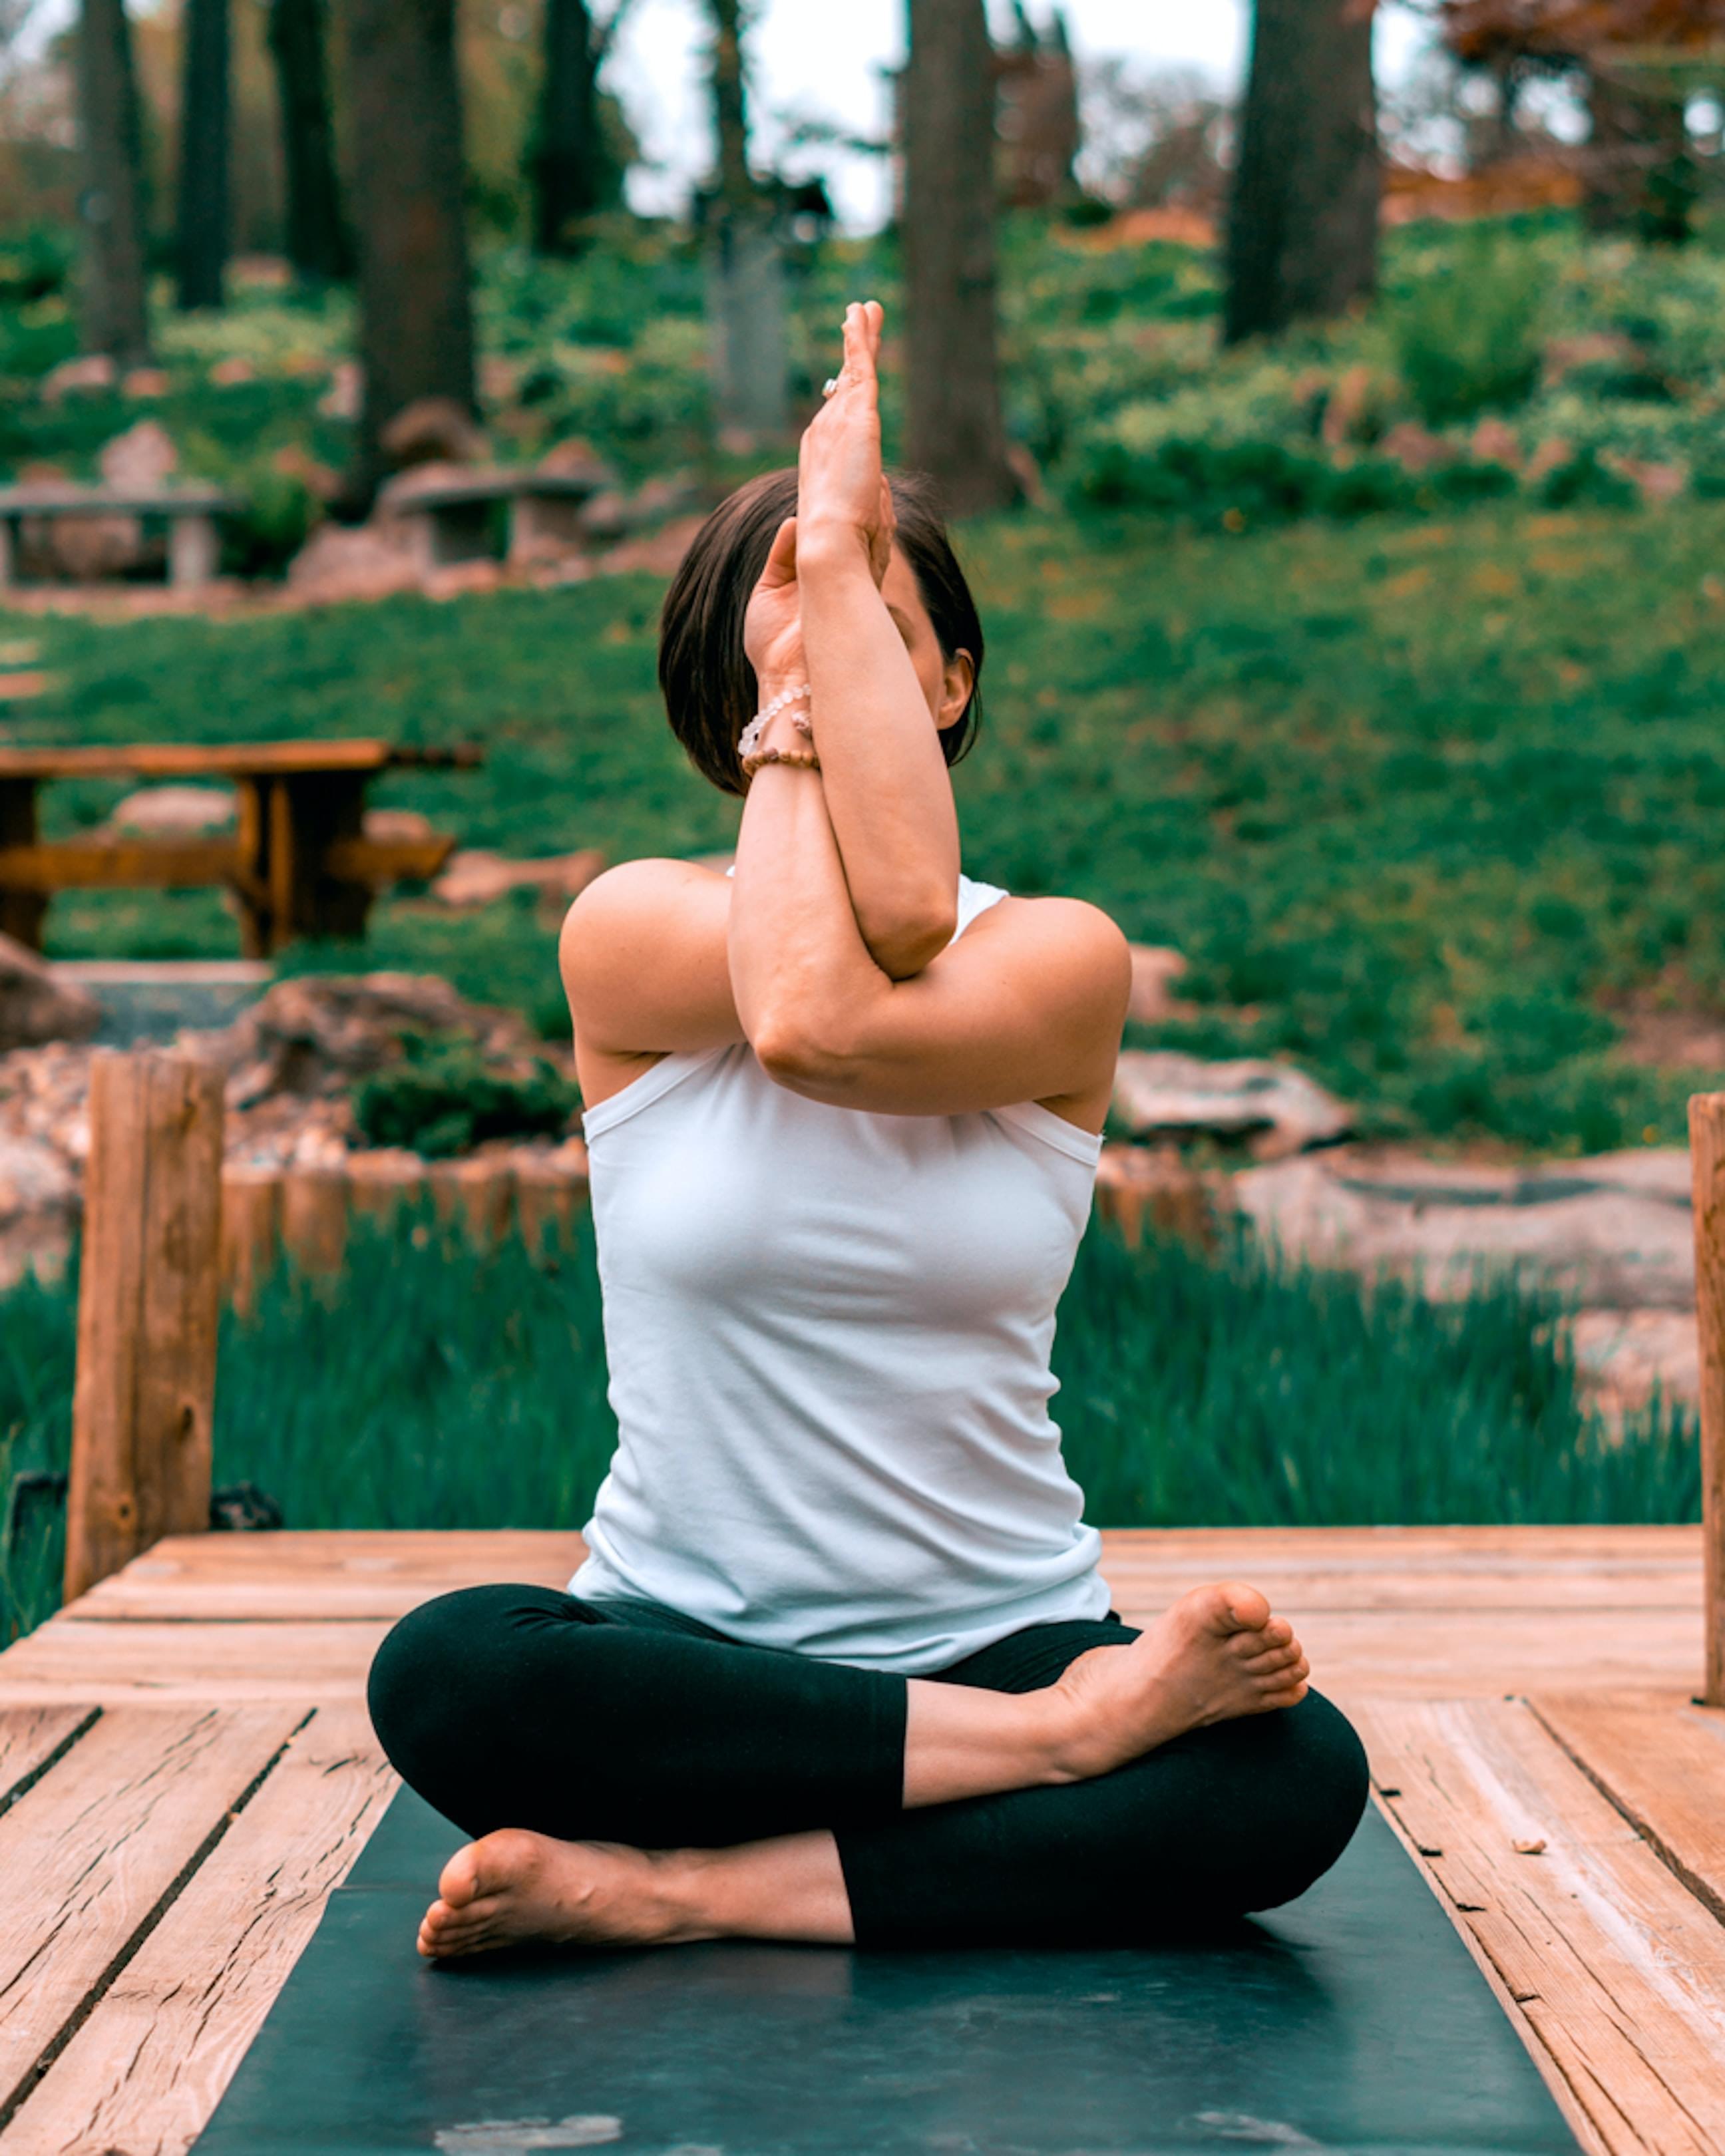 A dark-haired woman doing a seated yoga pose with arms twisted in front of her face on a wooden deck in front of a green space